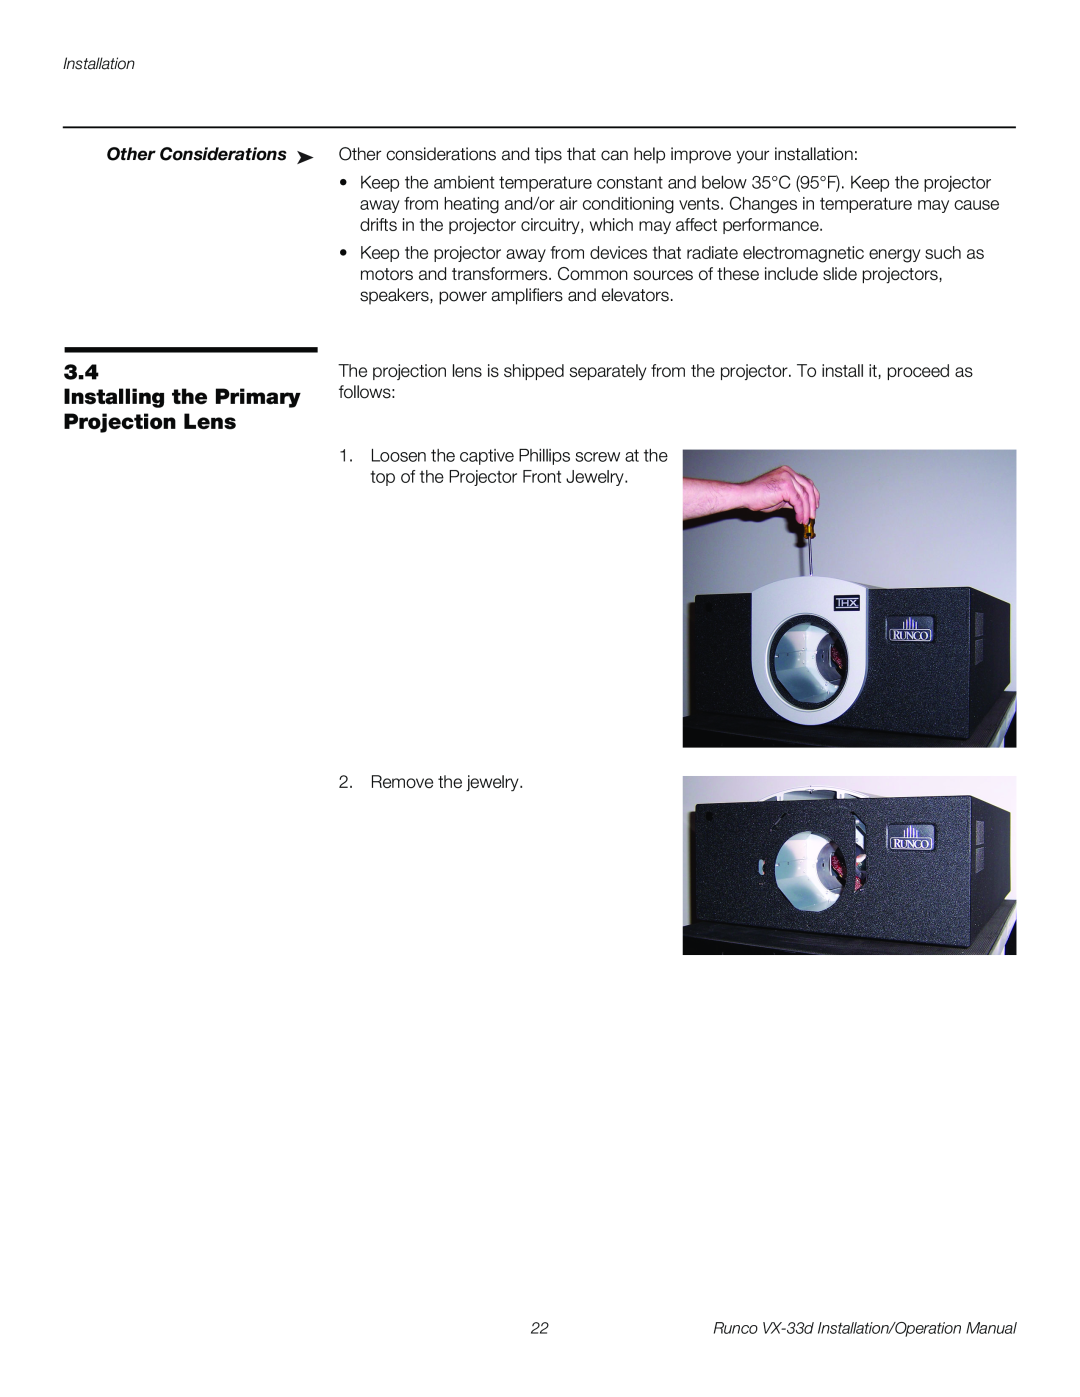 Runco VX-33D operation manual Installing the Primary Projection Lens, Other Considerations 